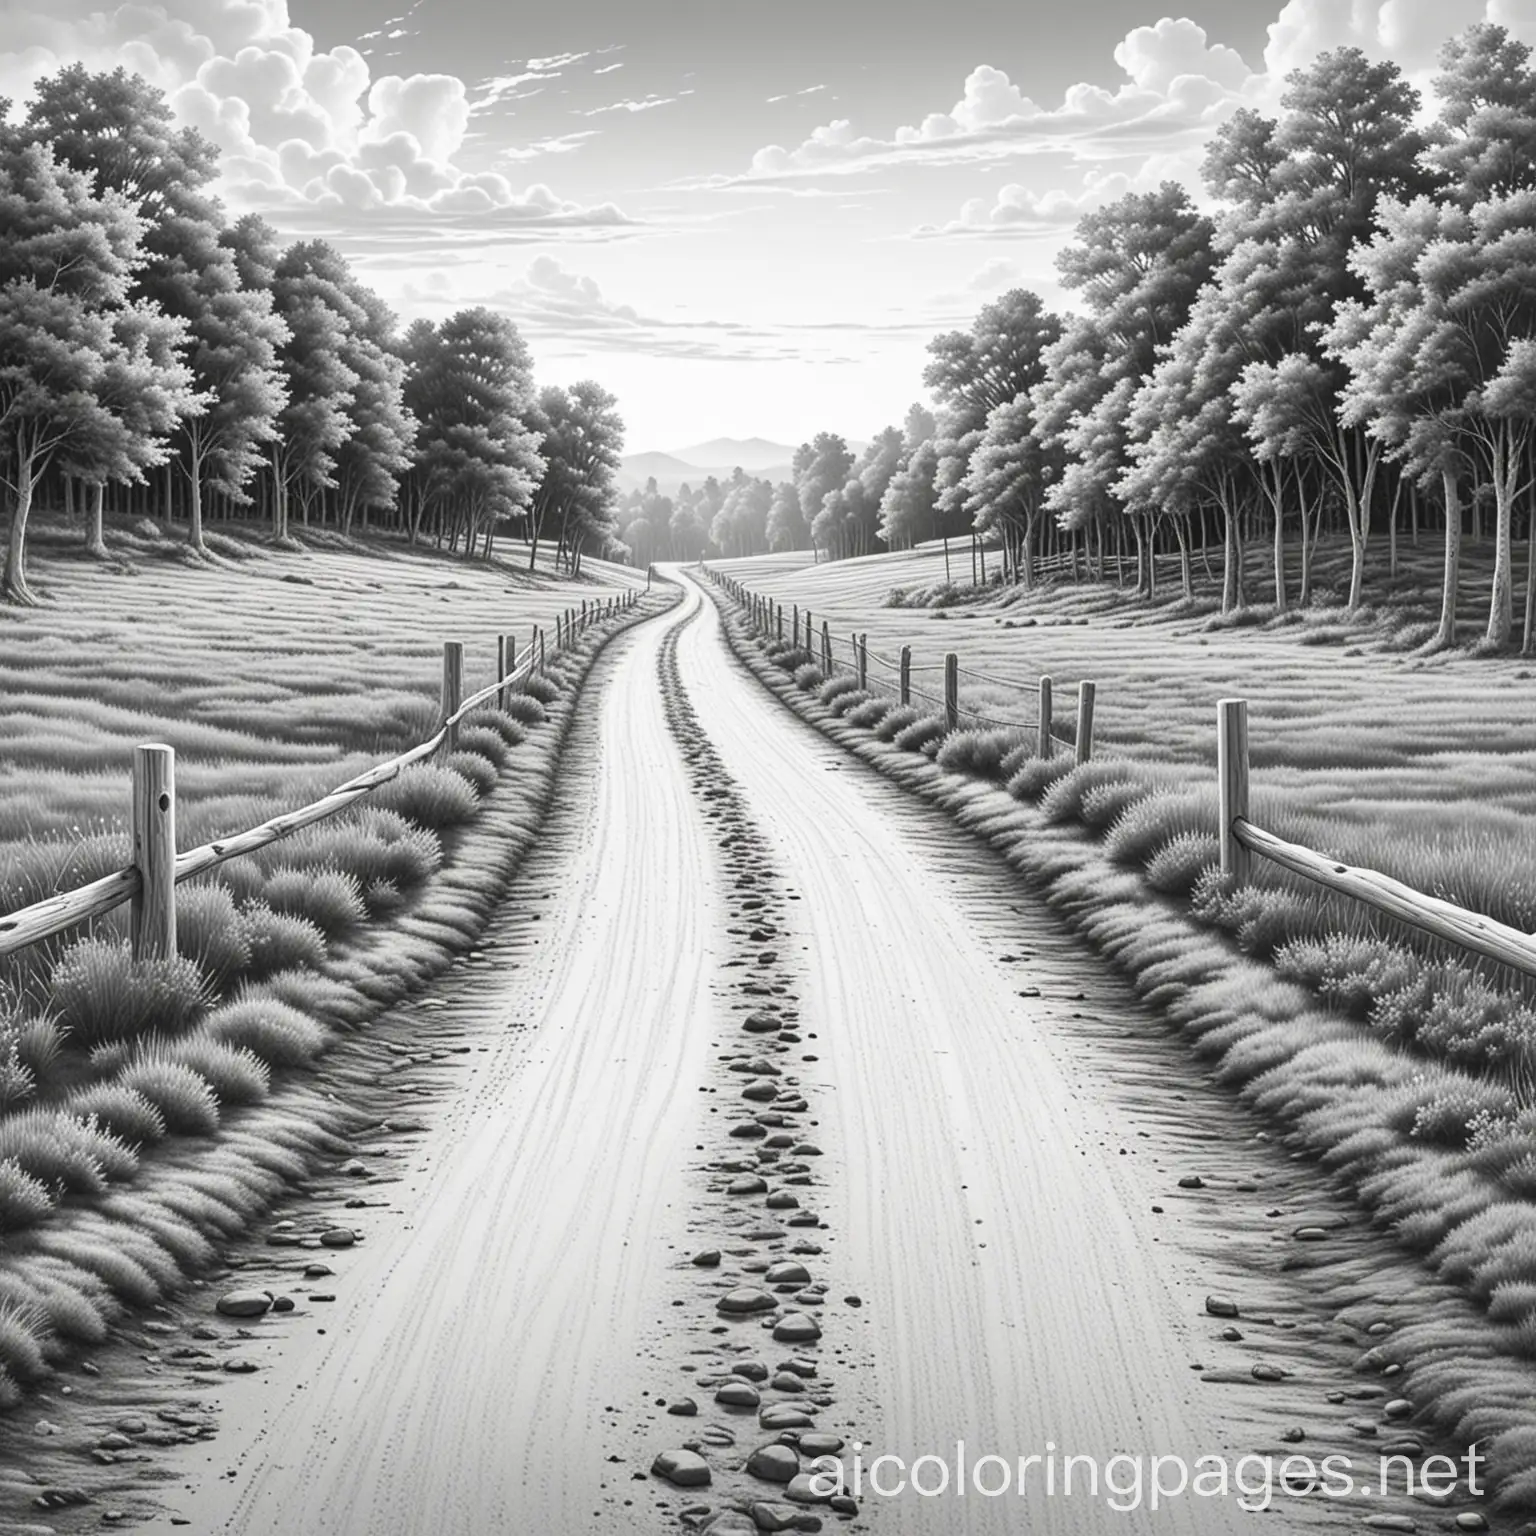 Grayscale country dirt road, Coloring Page, black and white, line art, white background, Simplicity, Ample White Space. The background of the coloring page is plain white to make it easy for young children to color within the lines. The outlines of all the subjects are easy to distinguish, making it simple for kids to color without too much difficulty.